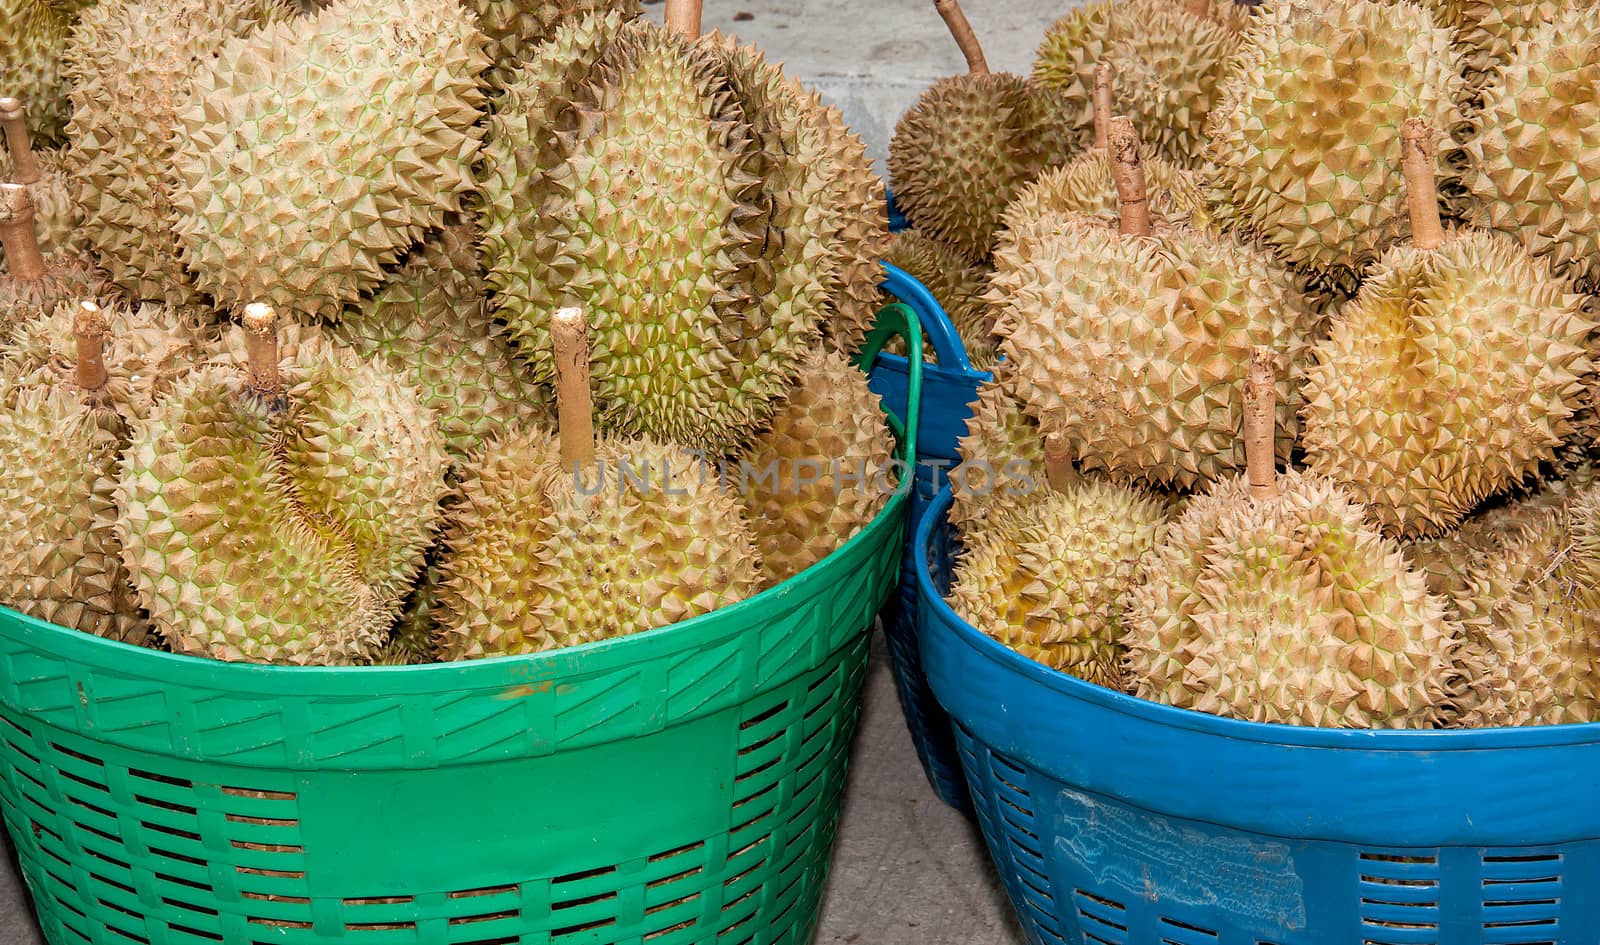 pile of durian In the basket for sale in local market in thailand